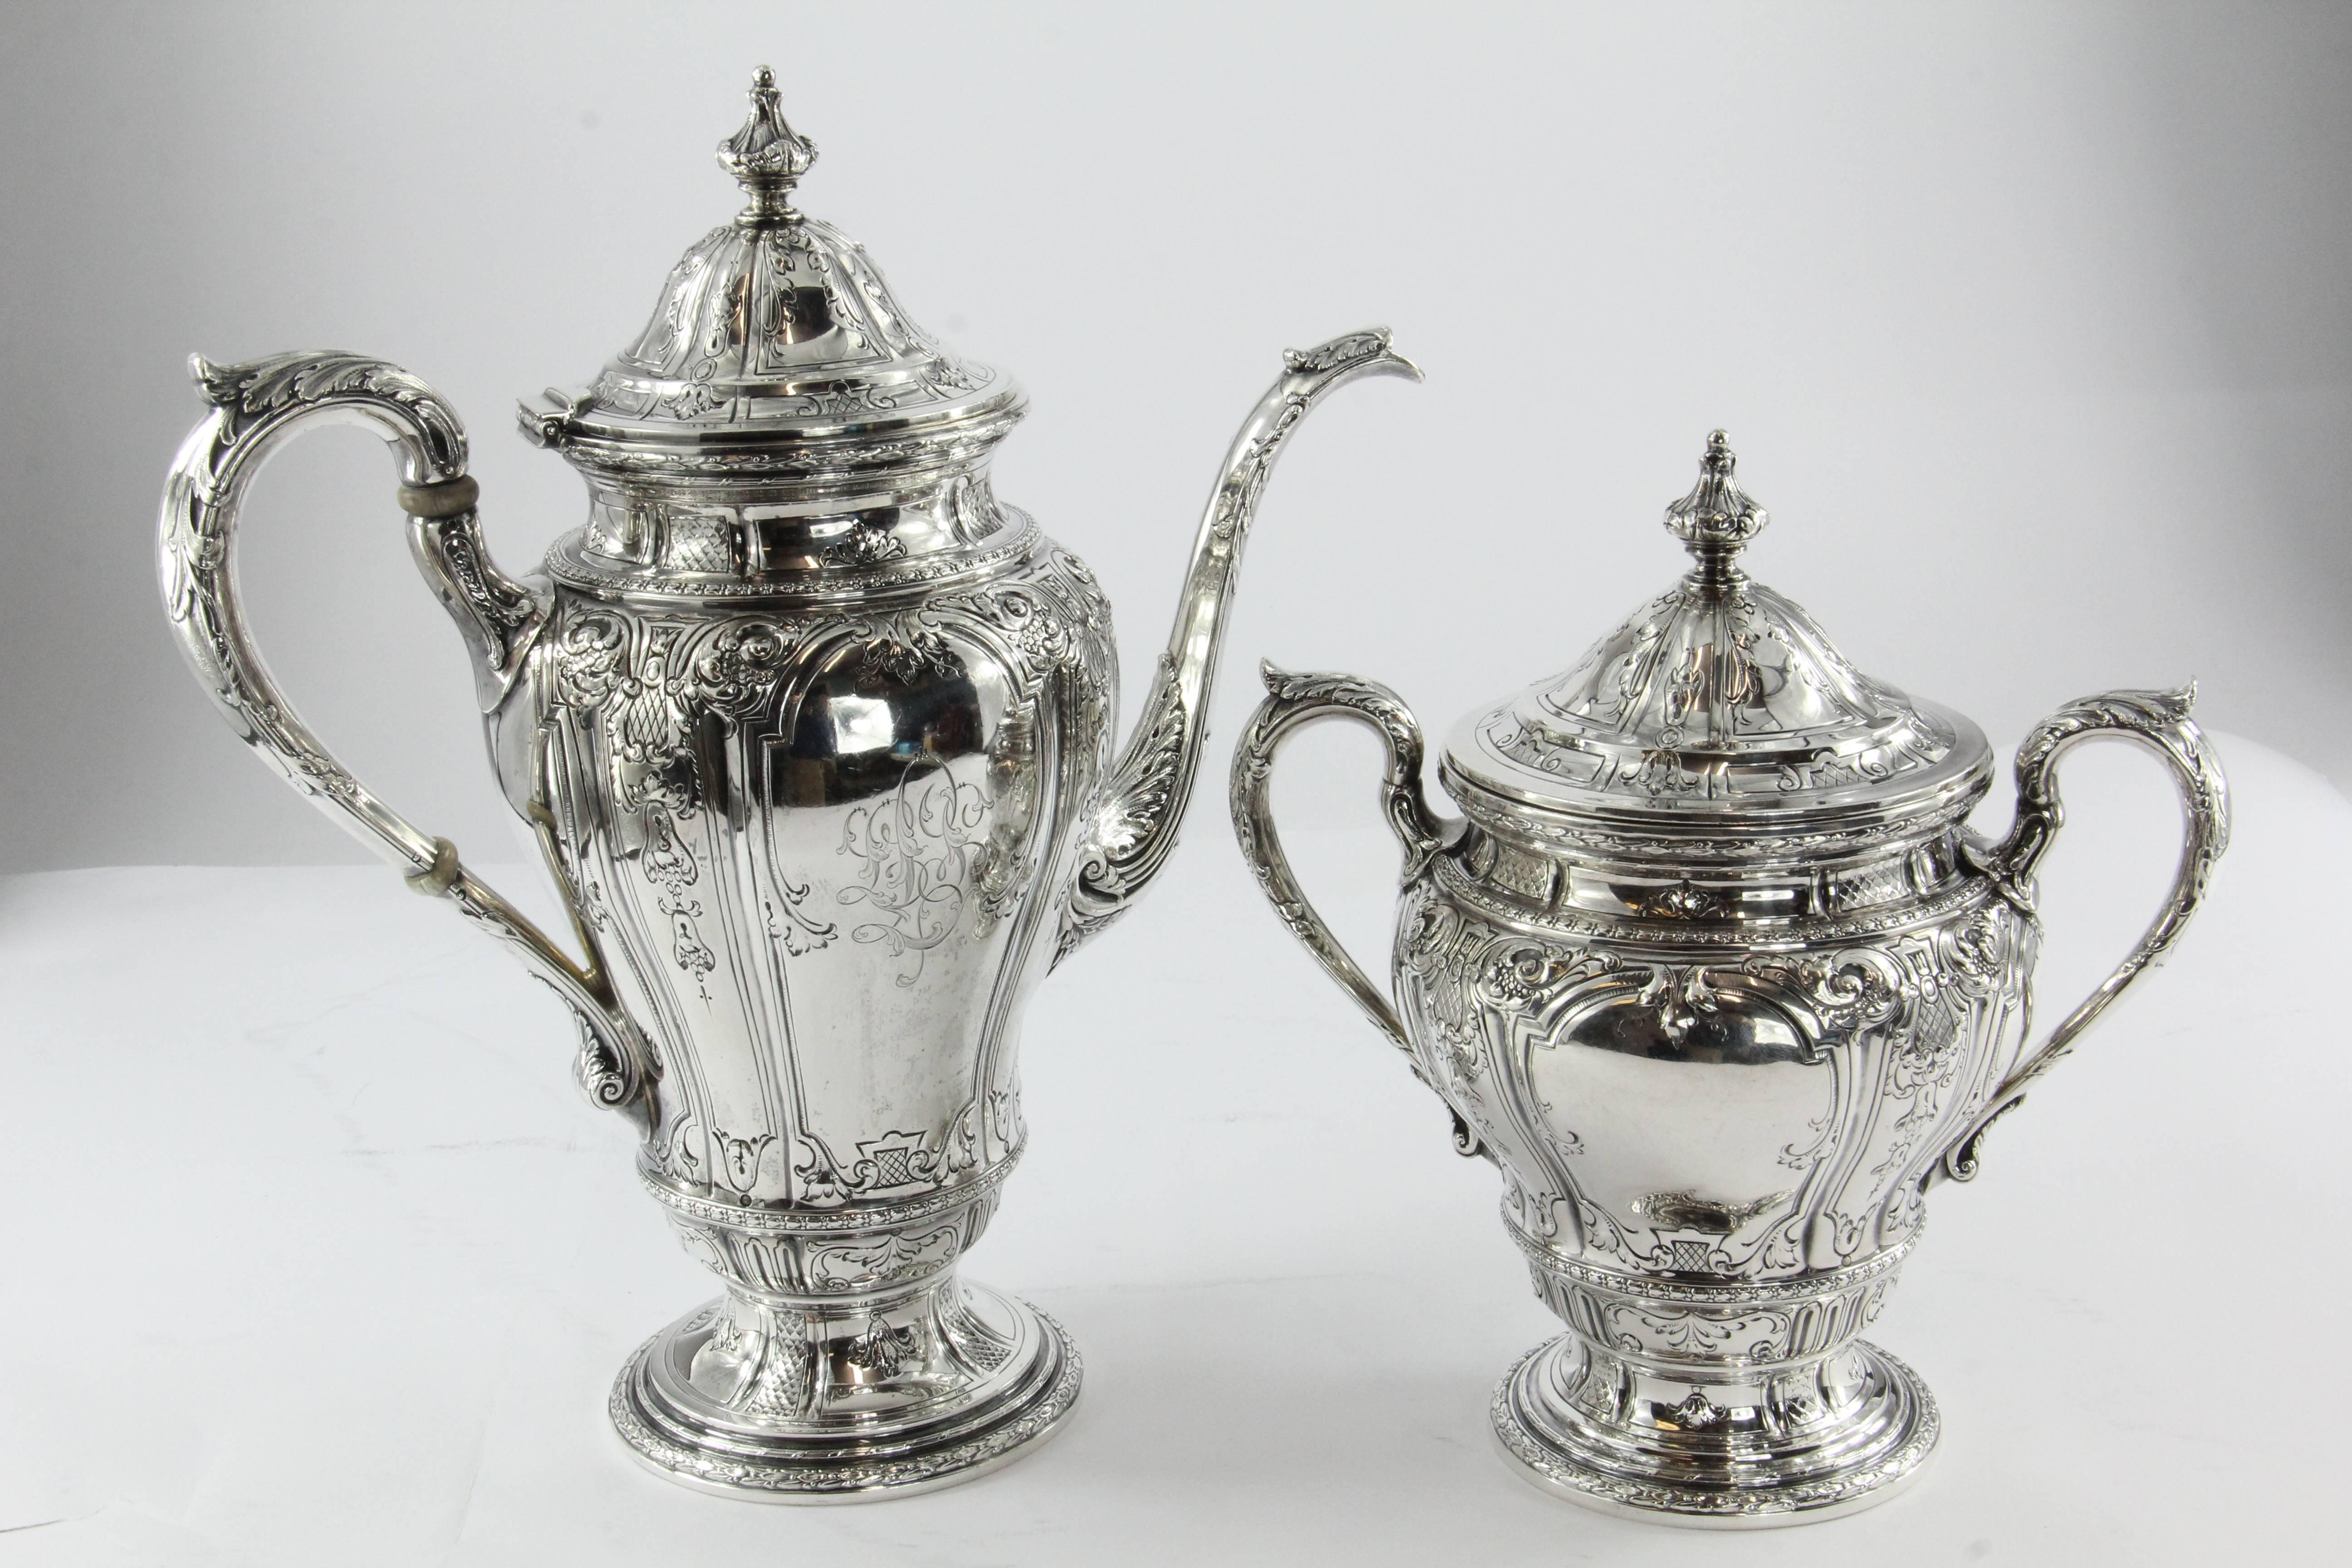 Antique Black Starr & Frost sterling silver complete seven-piece repousse tea set. The set is in great estate condition and ready to use. All the pieces have their original three letter fancy monogram on them. All of the pieces are hallmarked